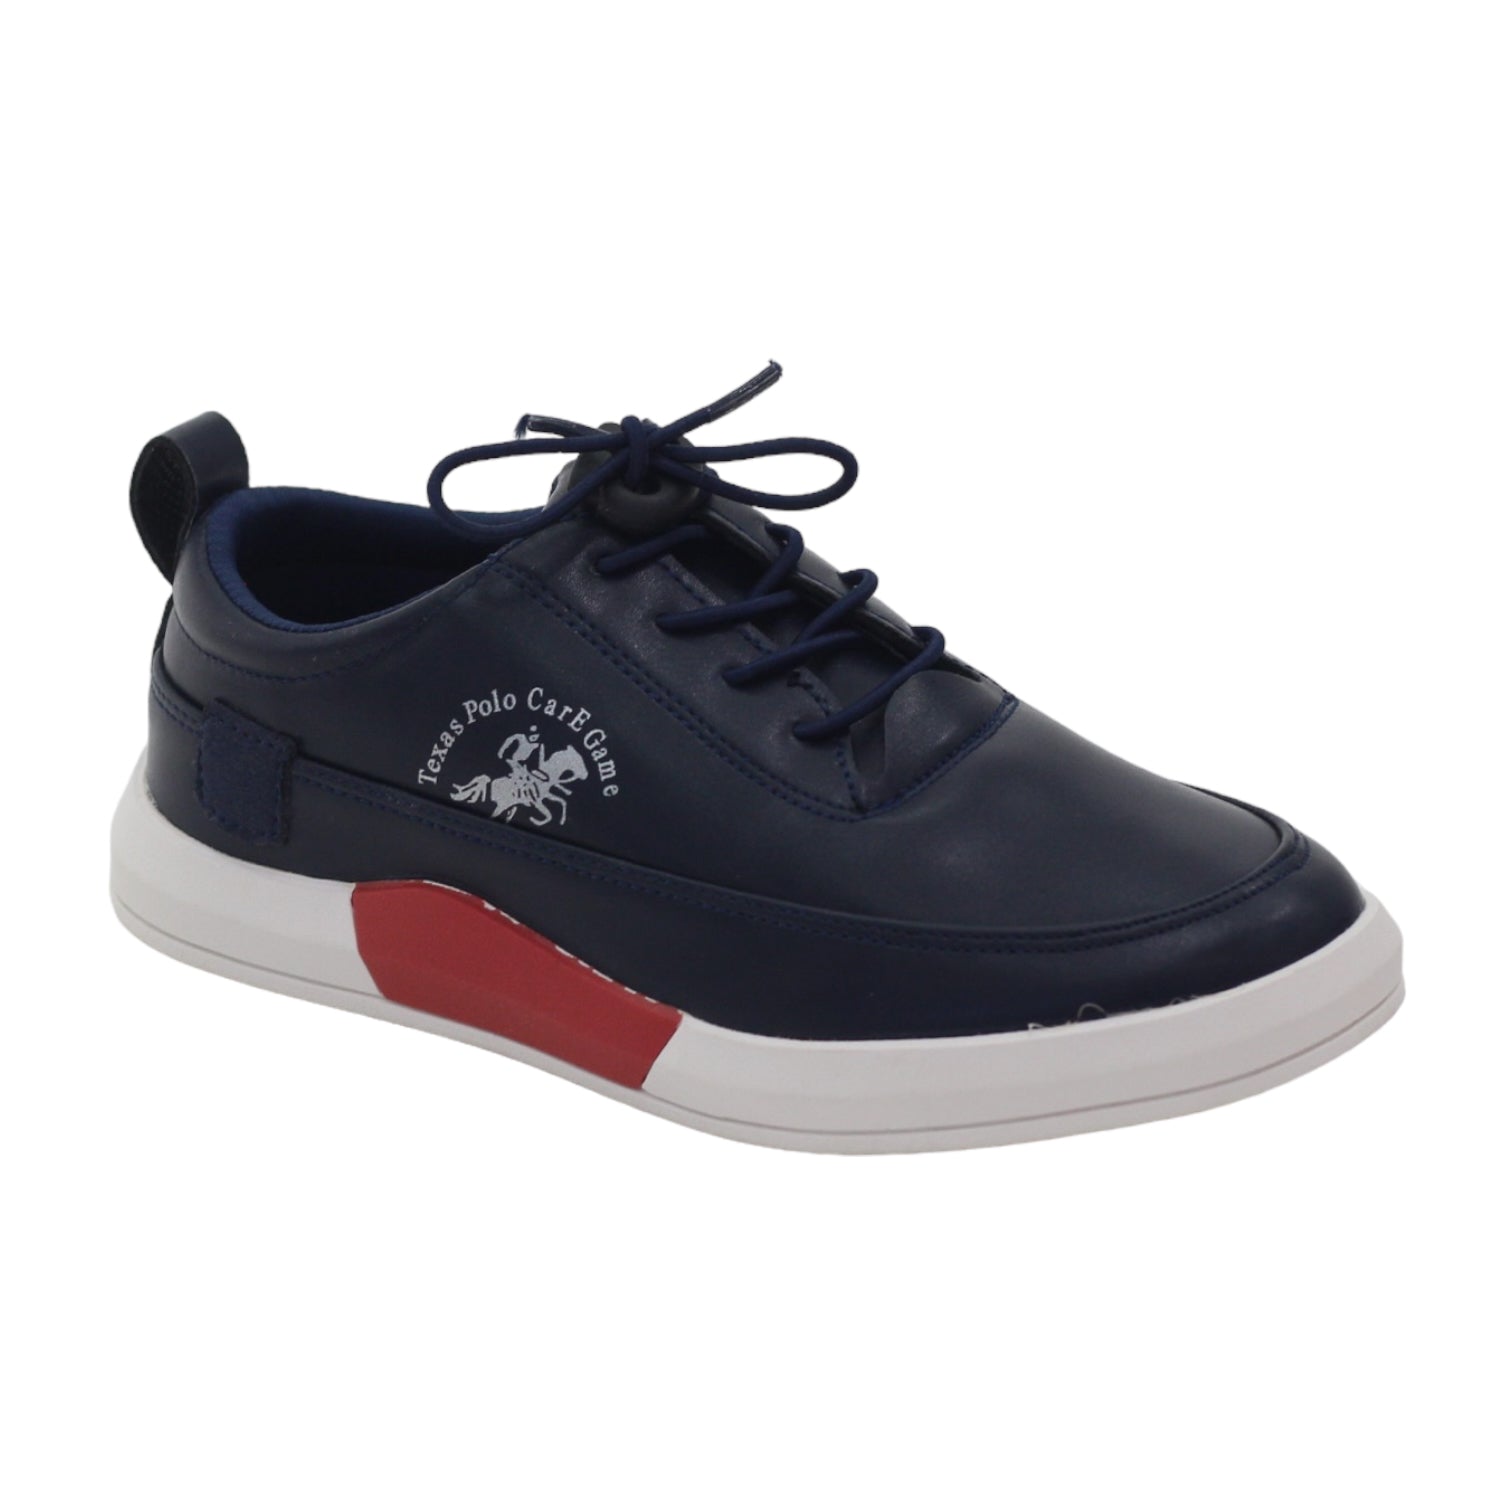 Oliver boys lace up B-19 sneaker navy